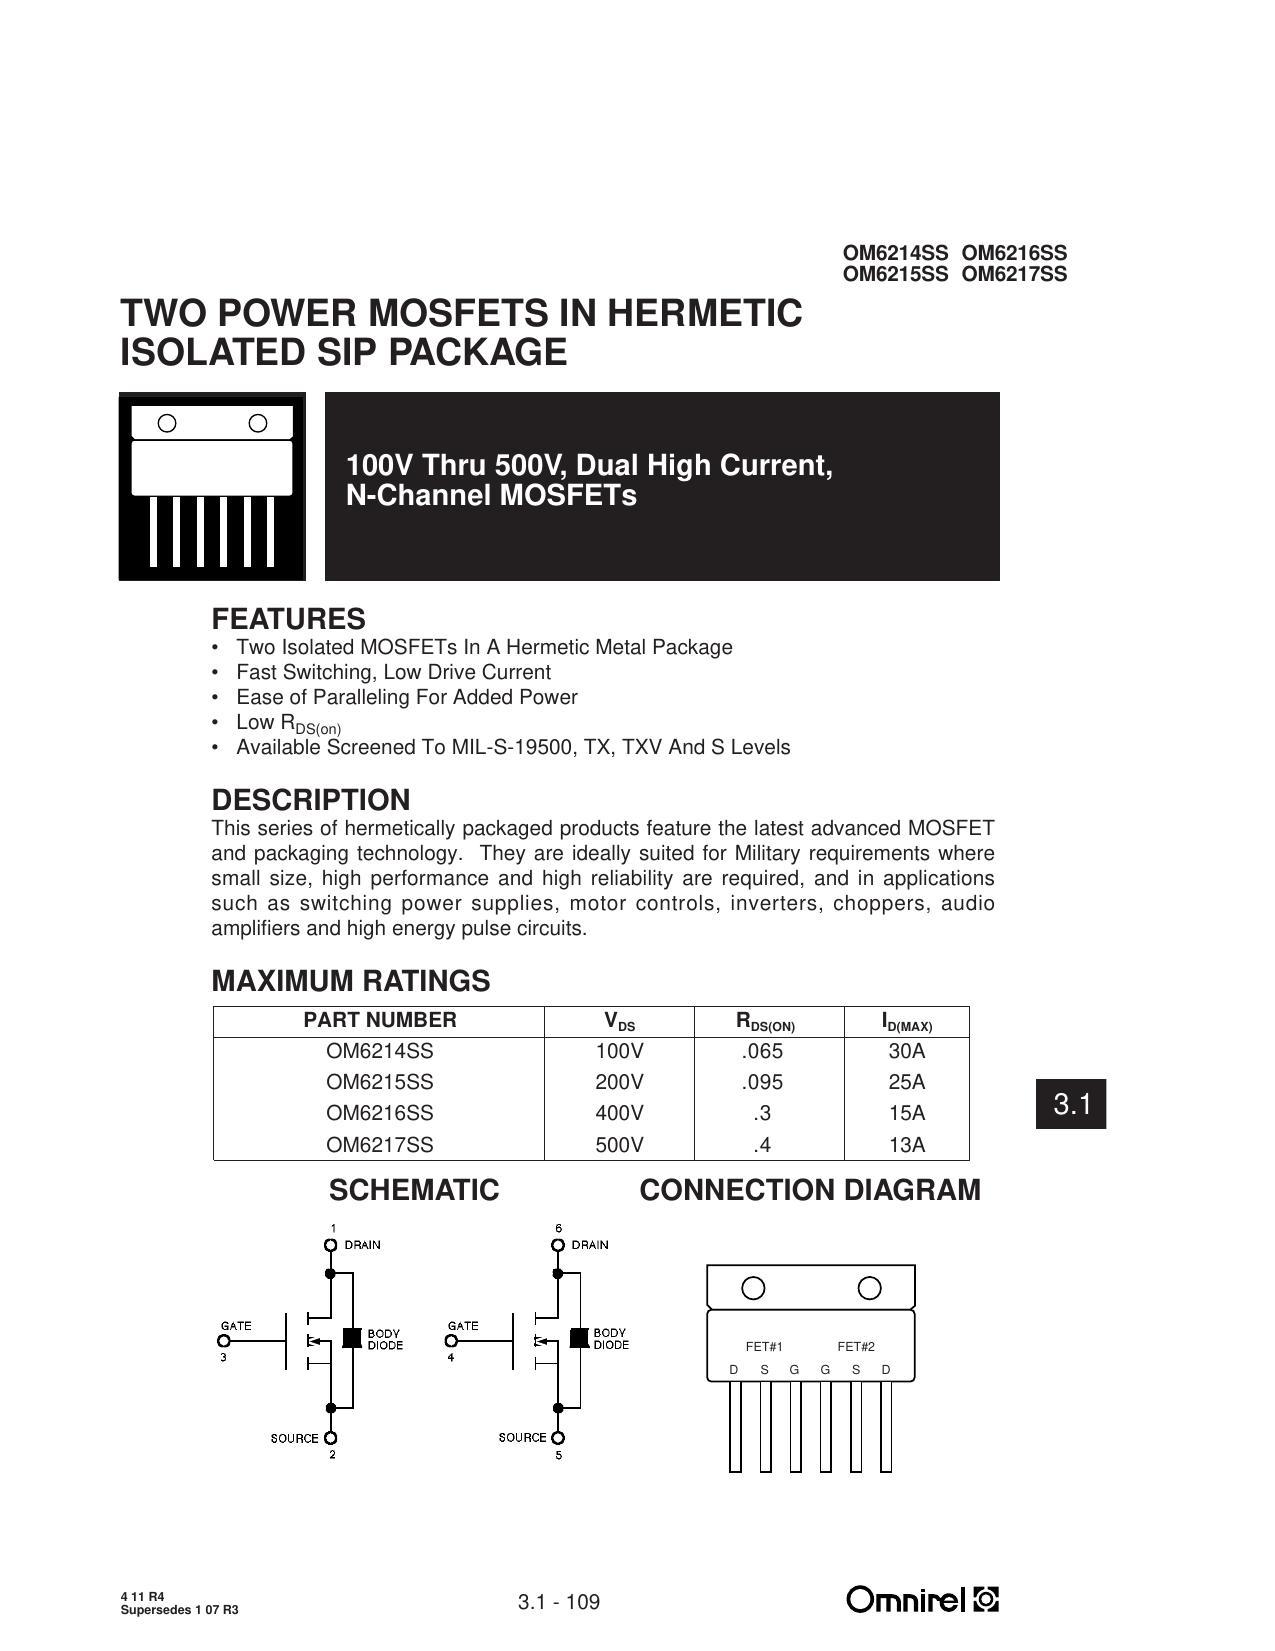 om62xxss-series---two-power-mosfets-in-hermetic-isolated-sip-package.pdf